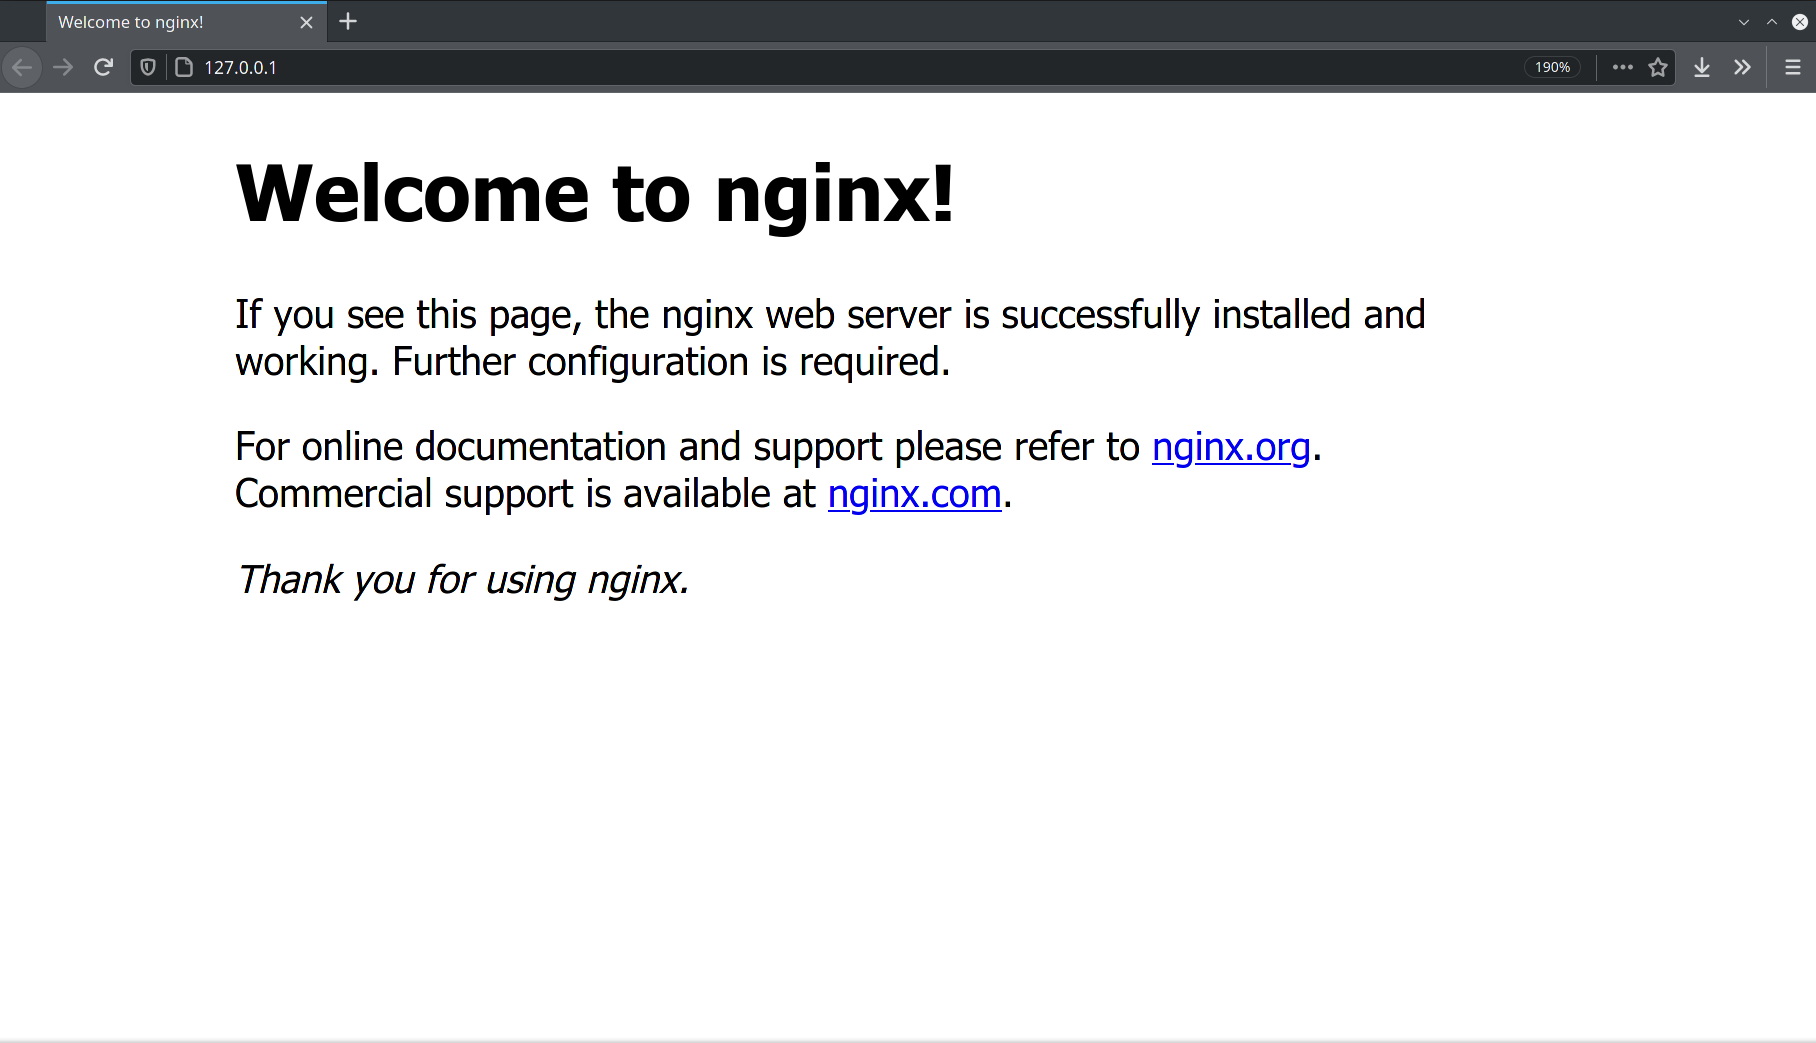 NGINX test page